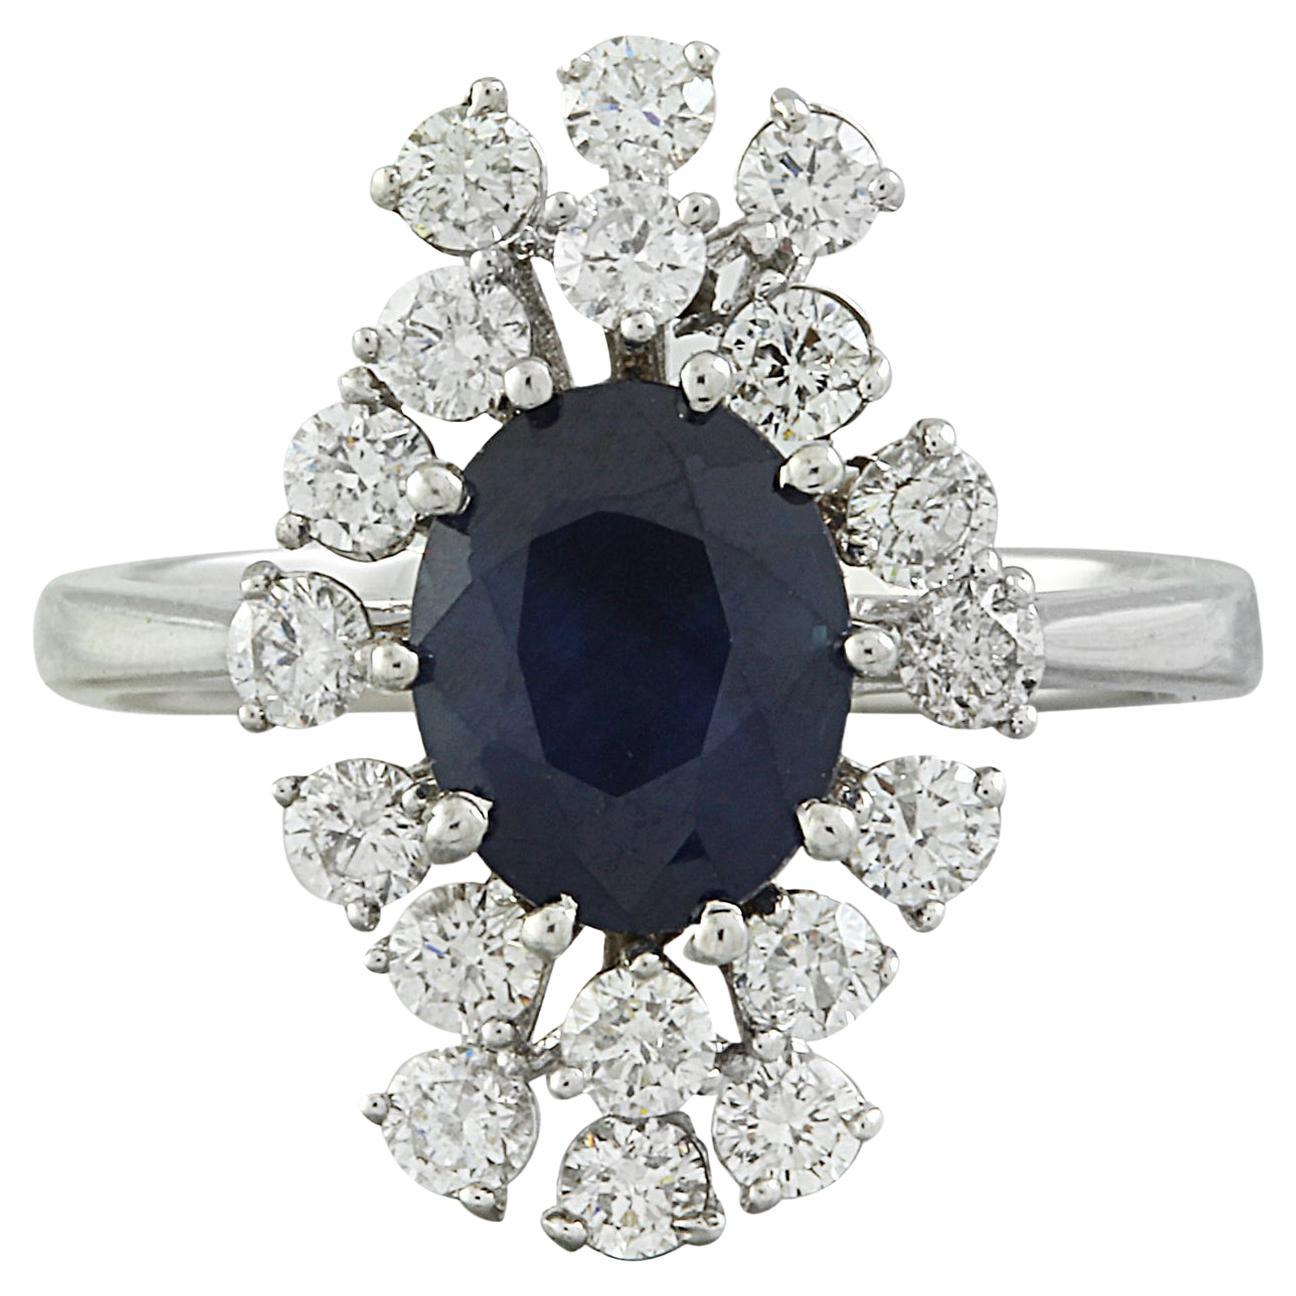 Exquisite Natural Sapphire Diamond Ring In 14 Karat Solid White Gold 